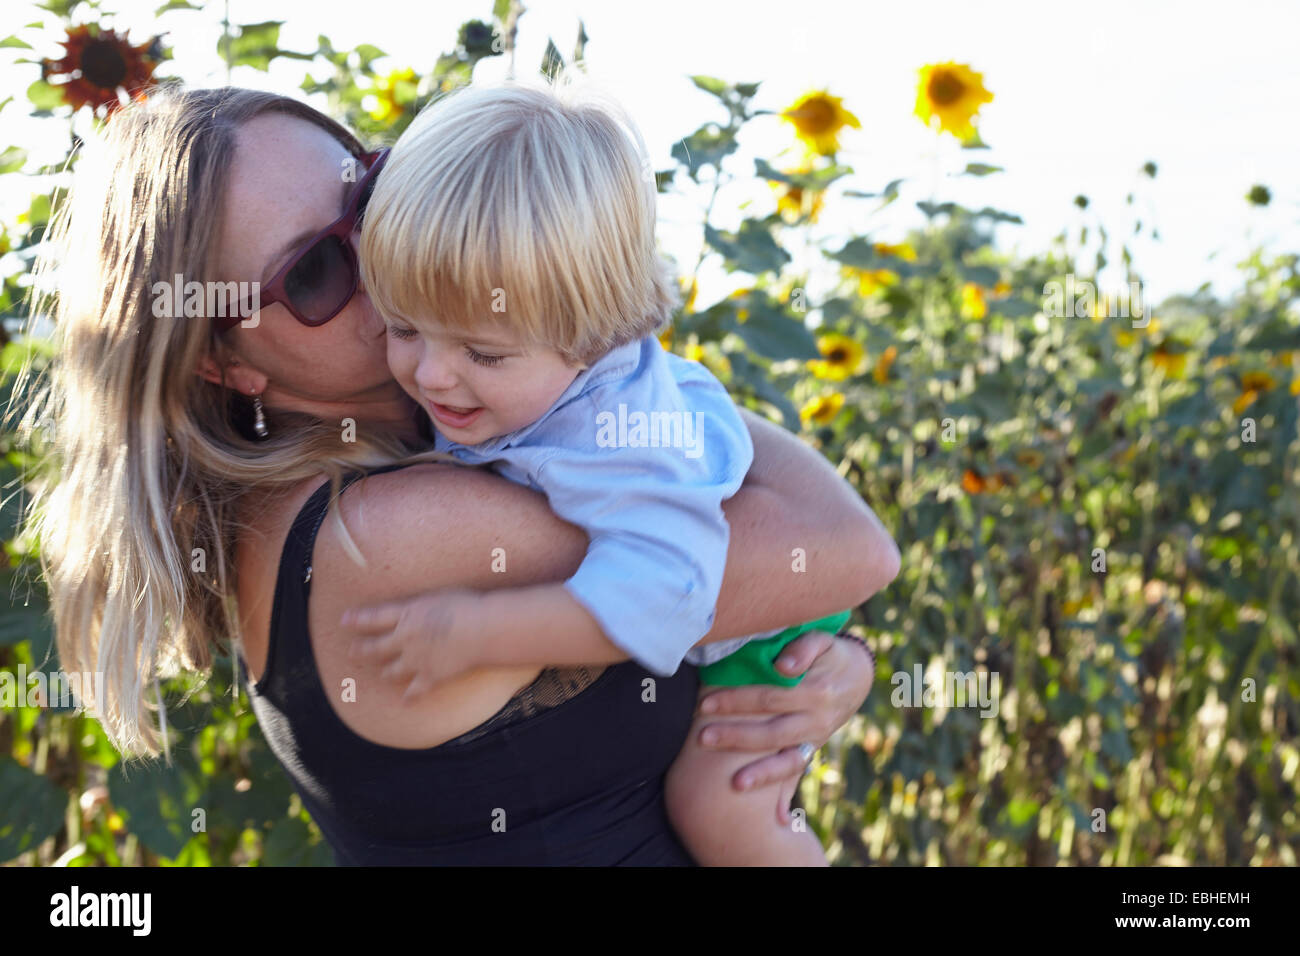 Mid adult woman and toddler hugging in sunflower field Stock Photo